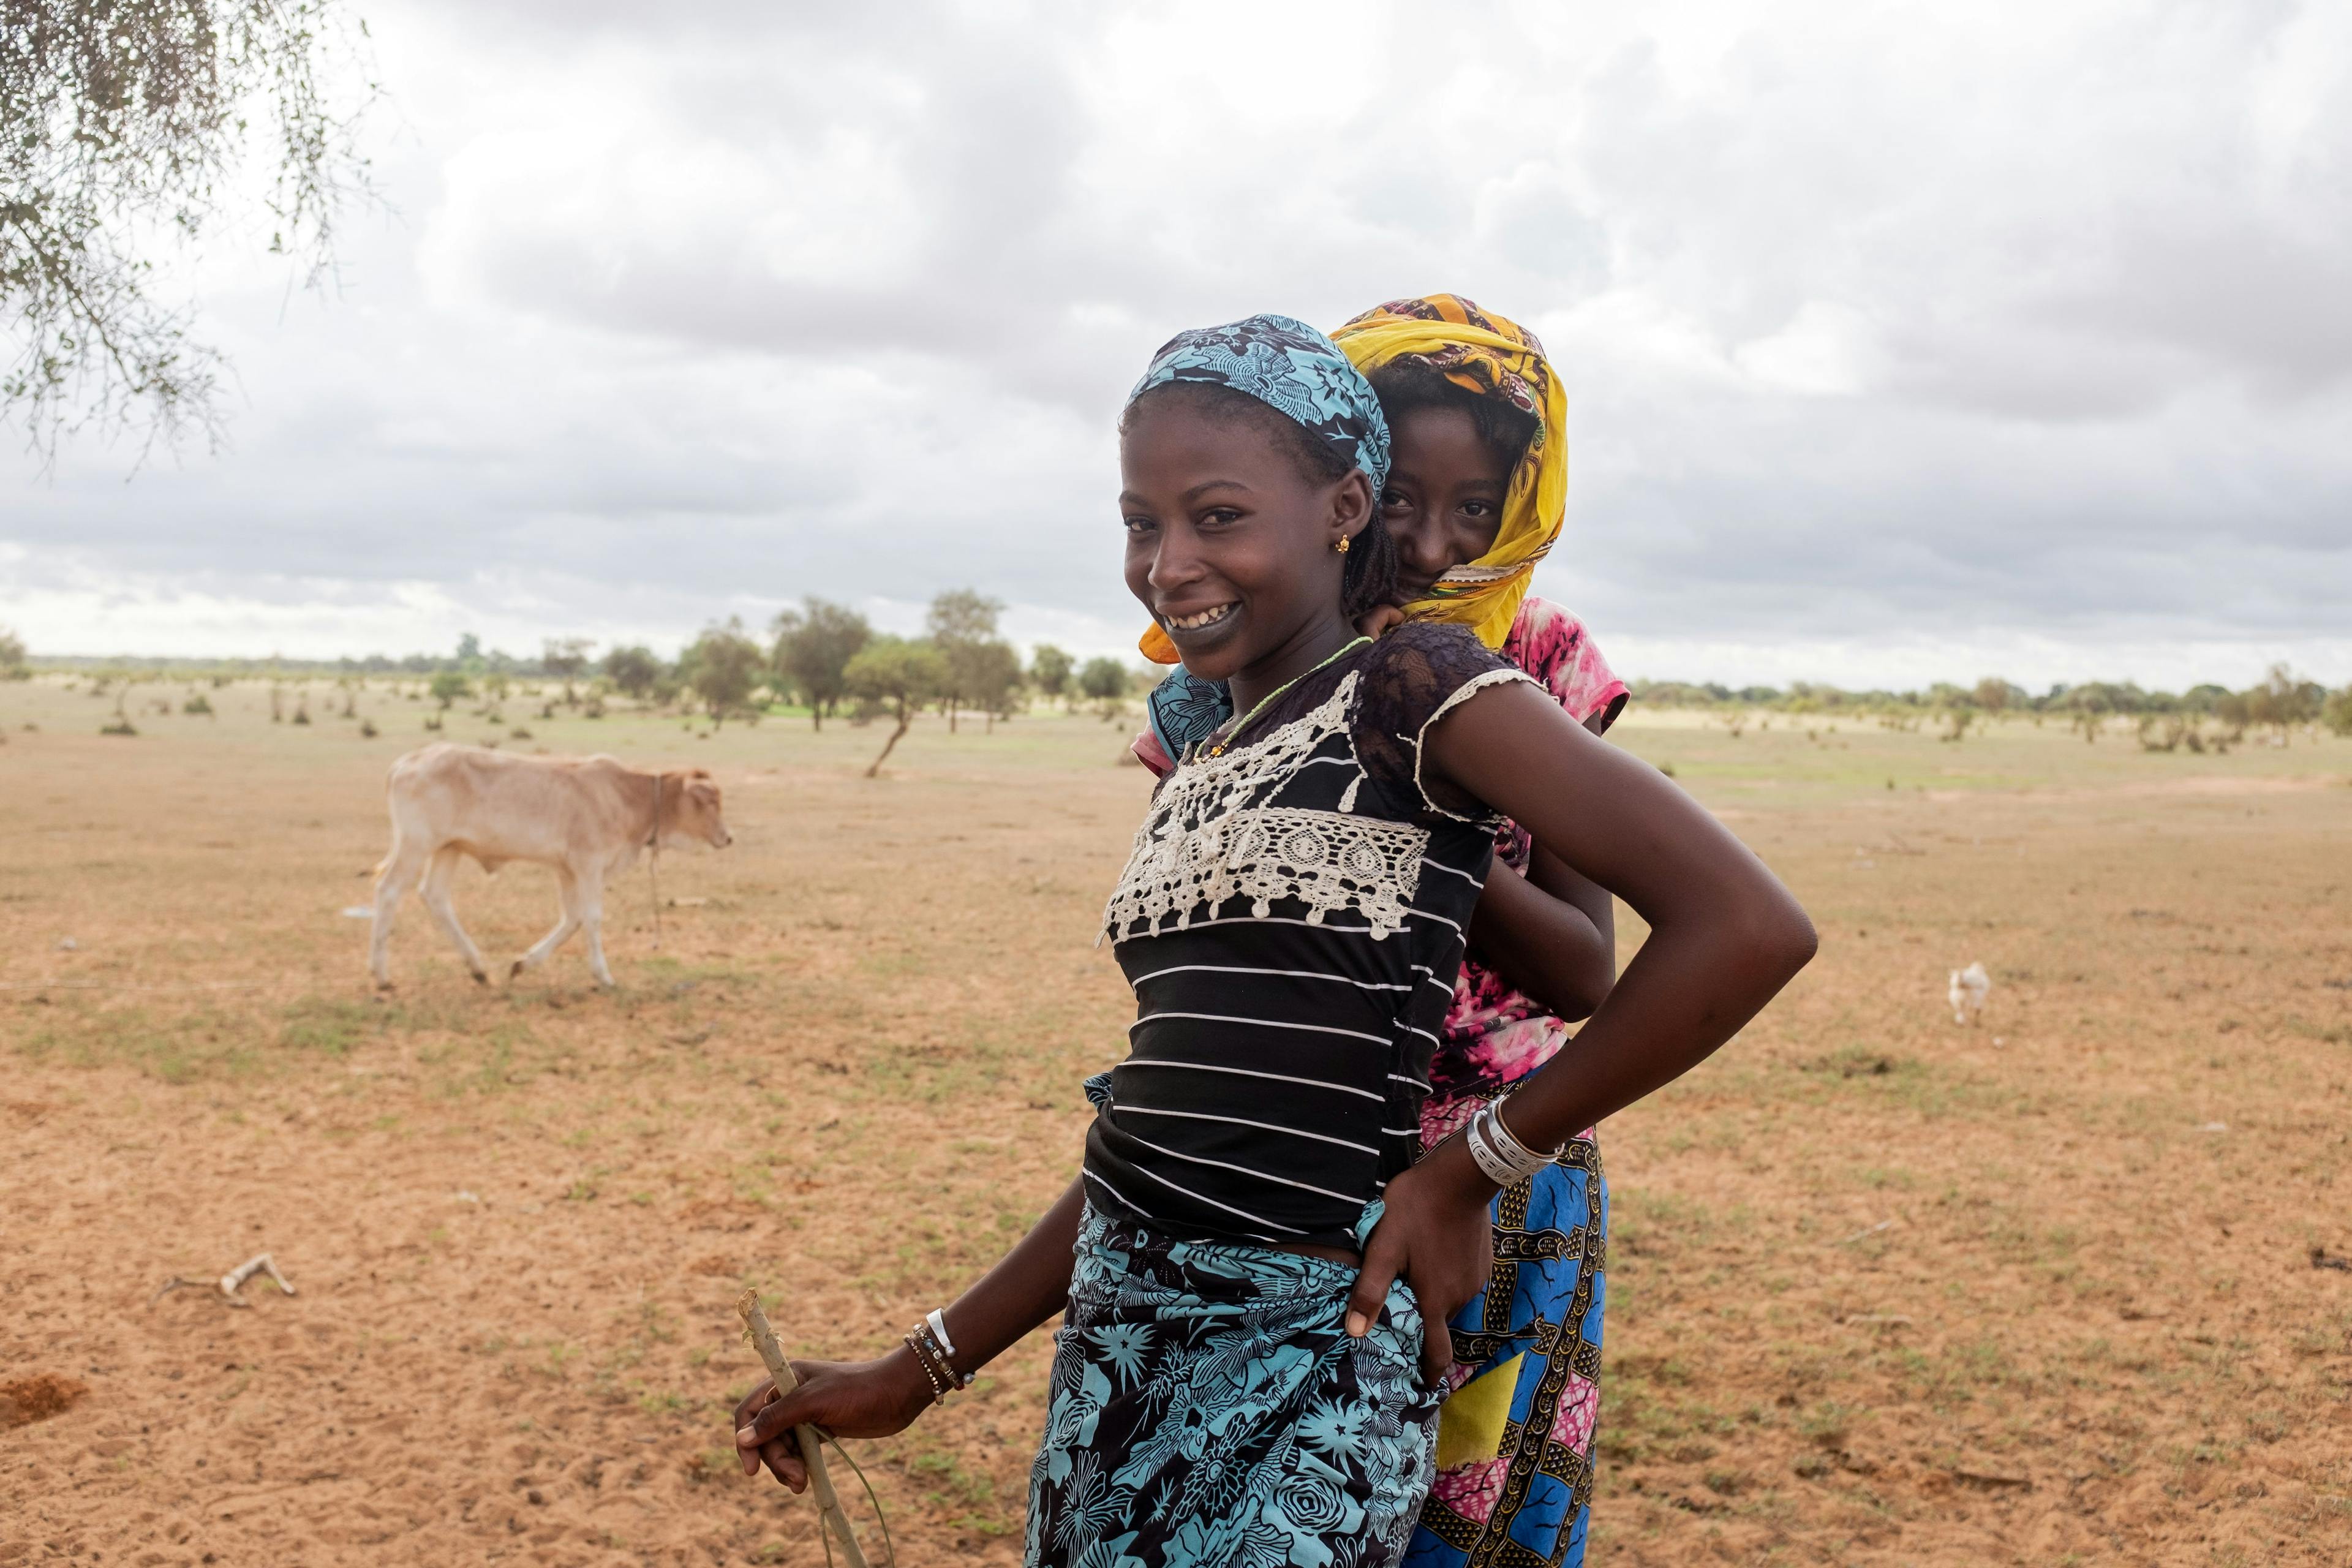 At risk but agile: women innovate to cope with hardships. Women are often poorer and more at risk than men, and often less well informed about climate issues. But, like these Fulani women, they are quick to draw on adaptation solutions and social networks, particularly when given accessible climate information.